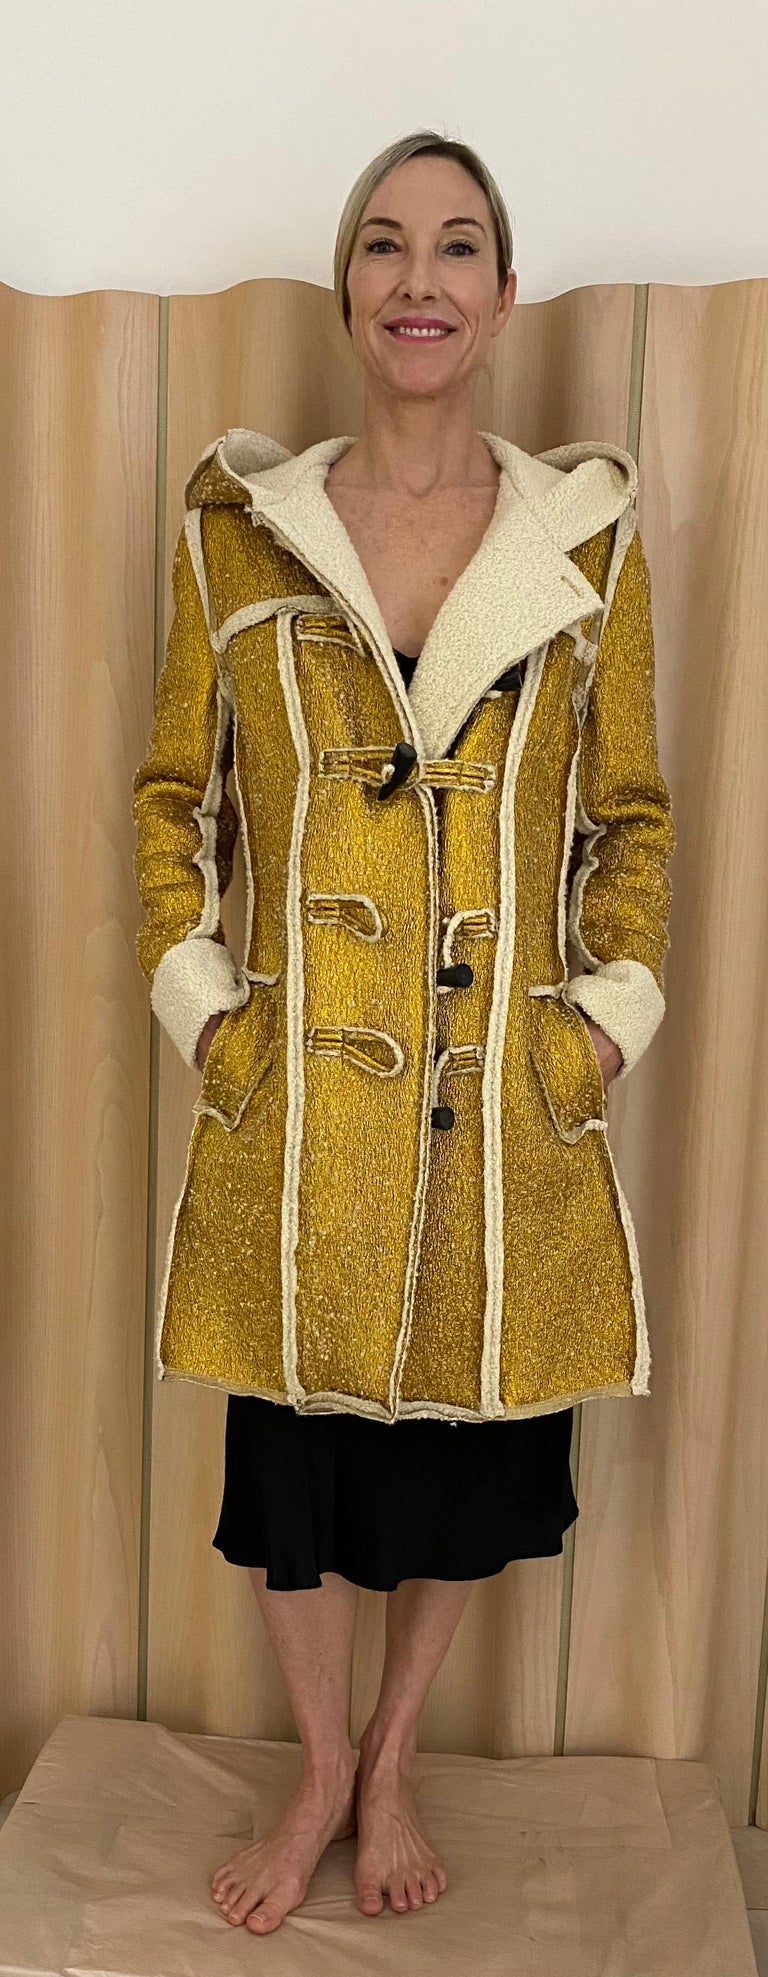 2015 LANVIN Metallic gold pea coat lined in shearling. Toggle buttons. Hooded coat.
coat has pockets. Marked size 40
Measurement: 
Bust : 40” ( buttoned) Hip 40”
Shoulder: 17” flat / Coat lengthen.6”